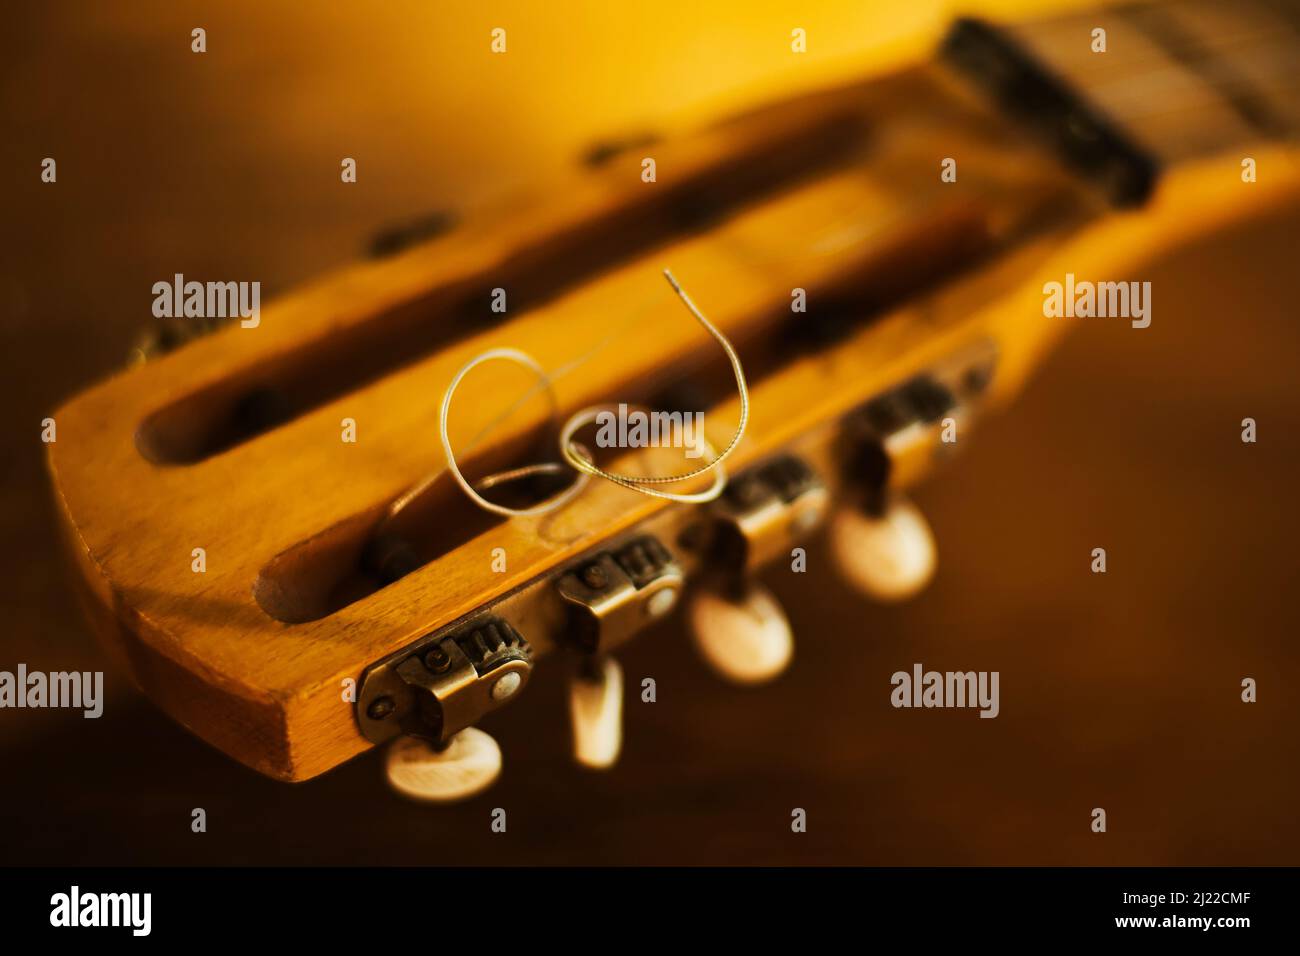 The fretboard of an old vintage guitar with metal strings on a sunny day. A musical instrument. Creation. Solfeggio. Stock Photo